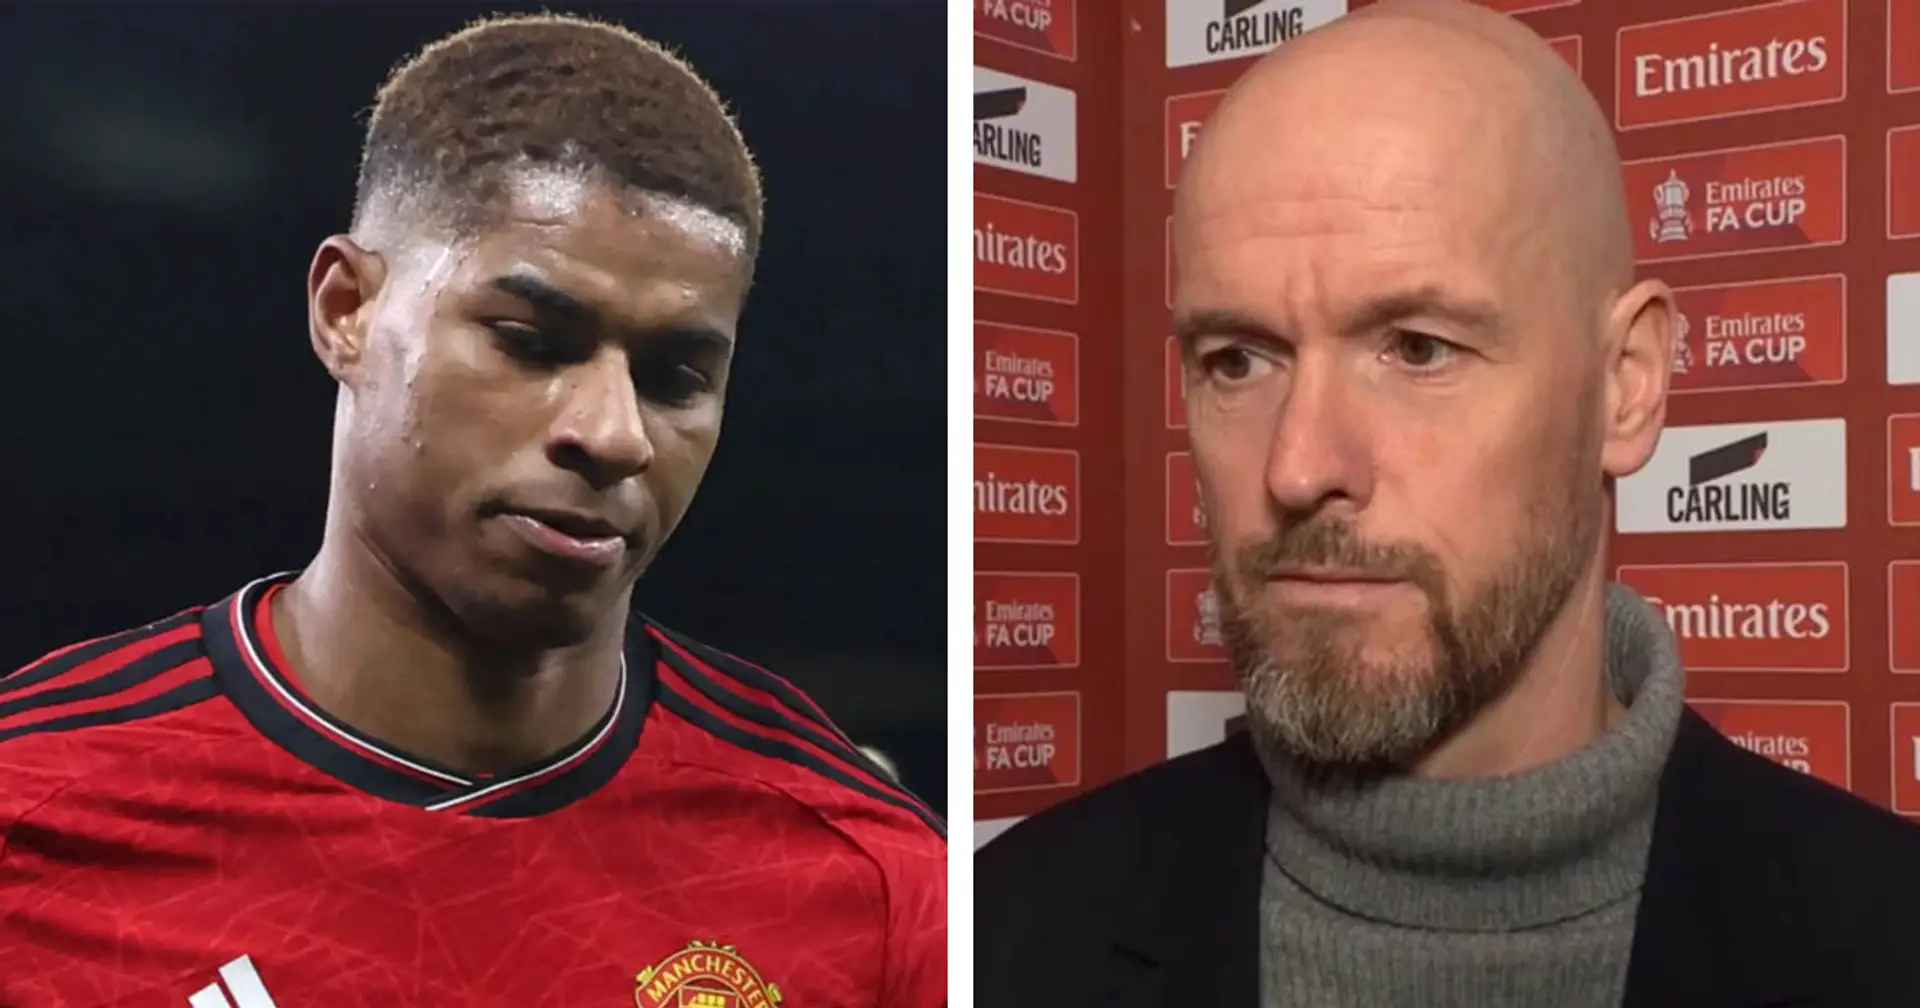 Ten Hag vows to deal with Rashford situation & 4 more big Man United stories you might've missed